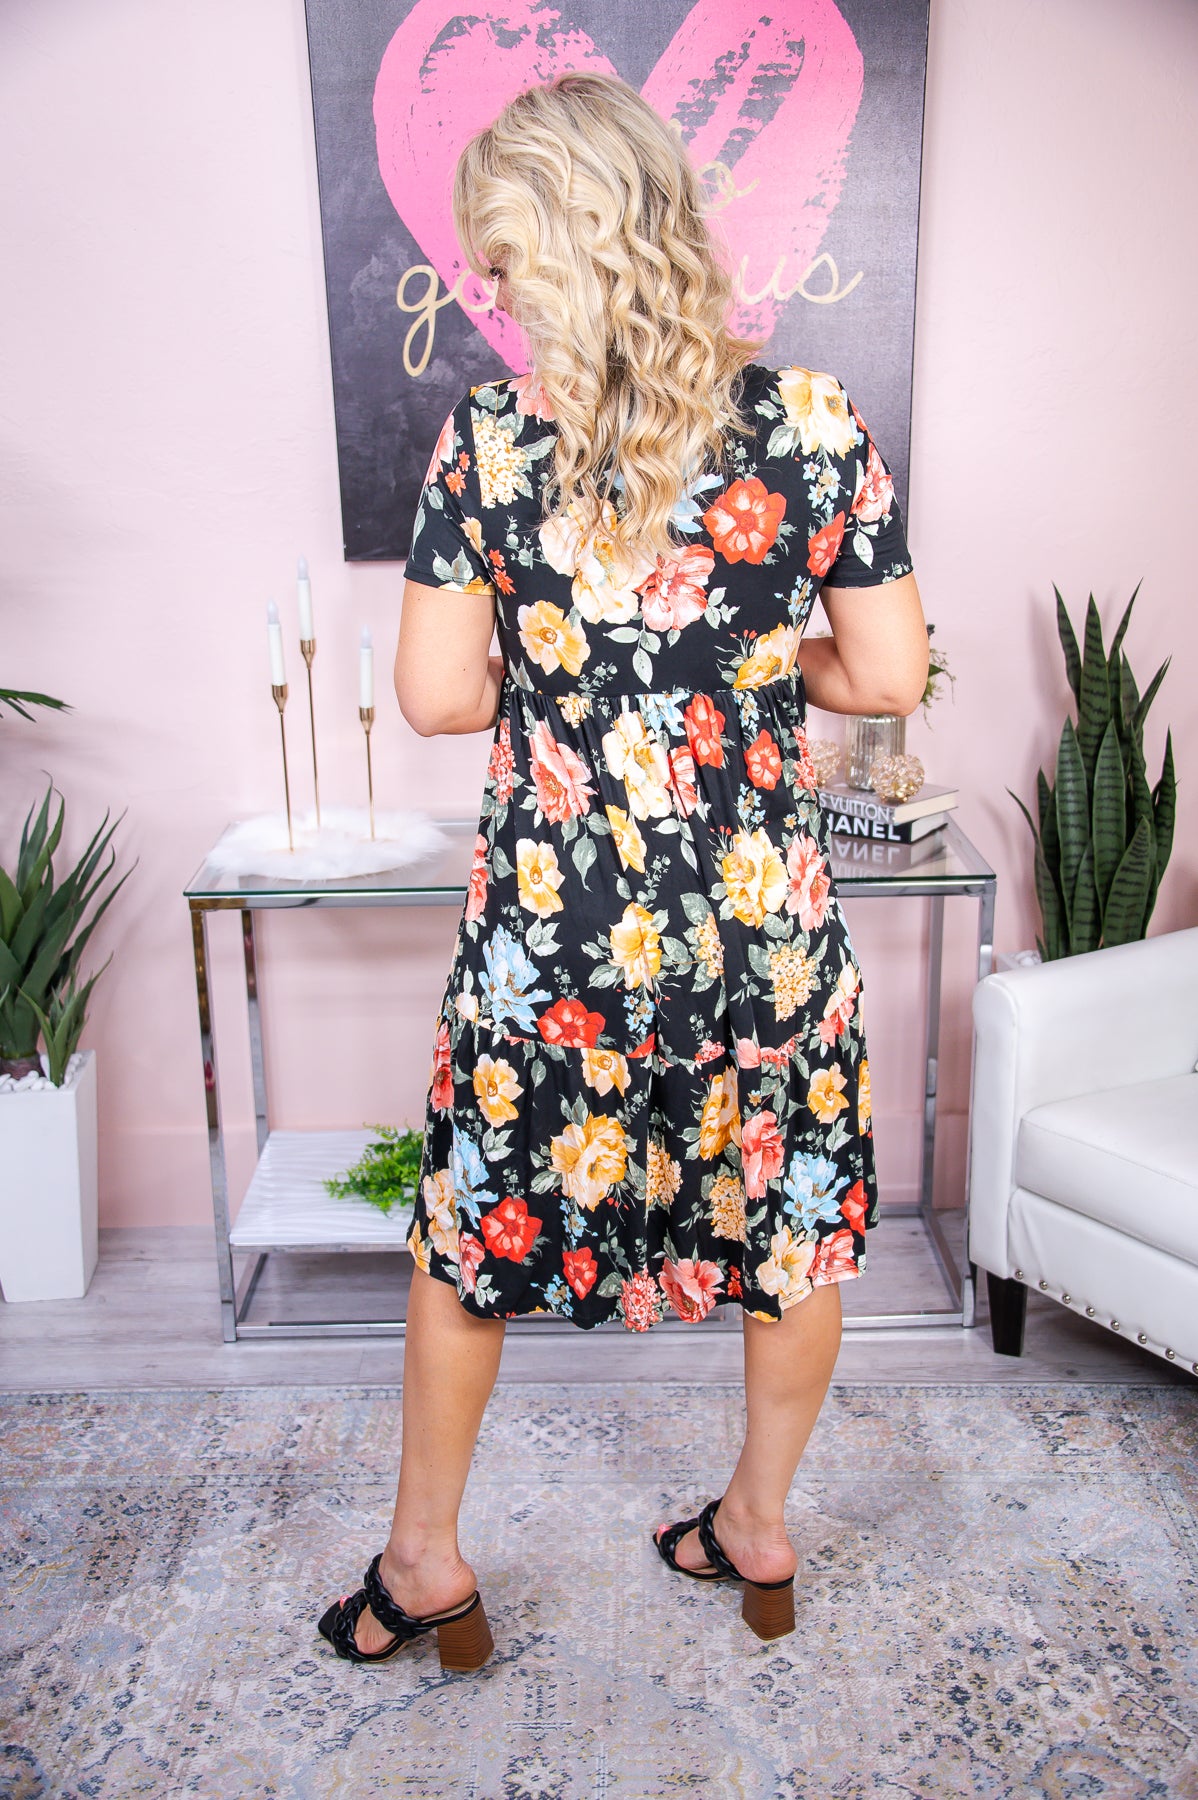 Styled To Perfection Black/Multi Color Floral Dress - D4950BK